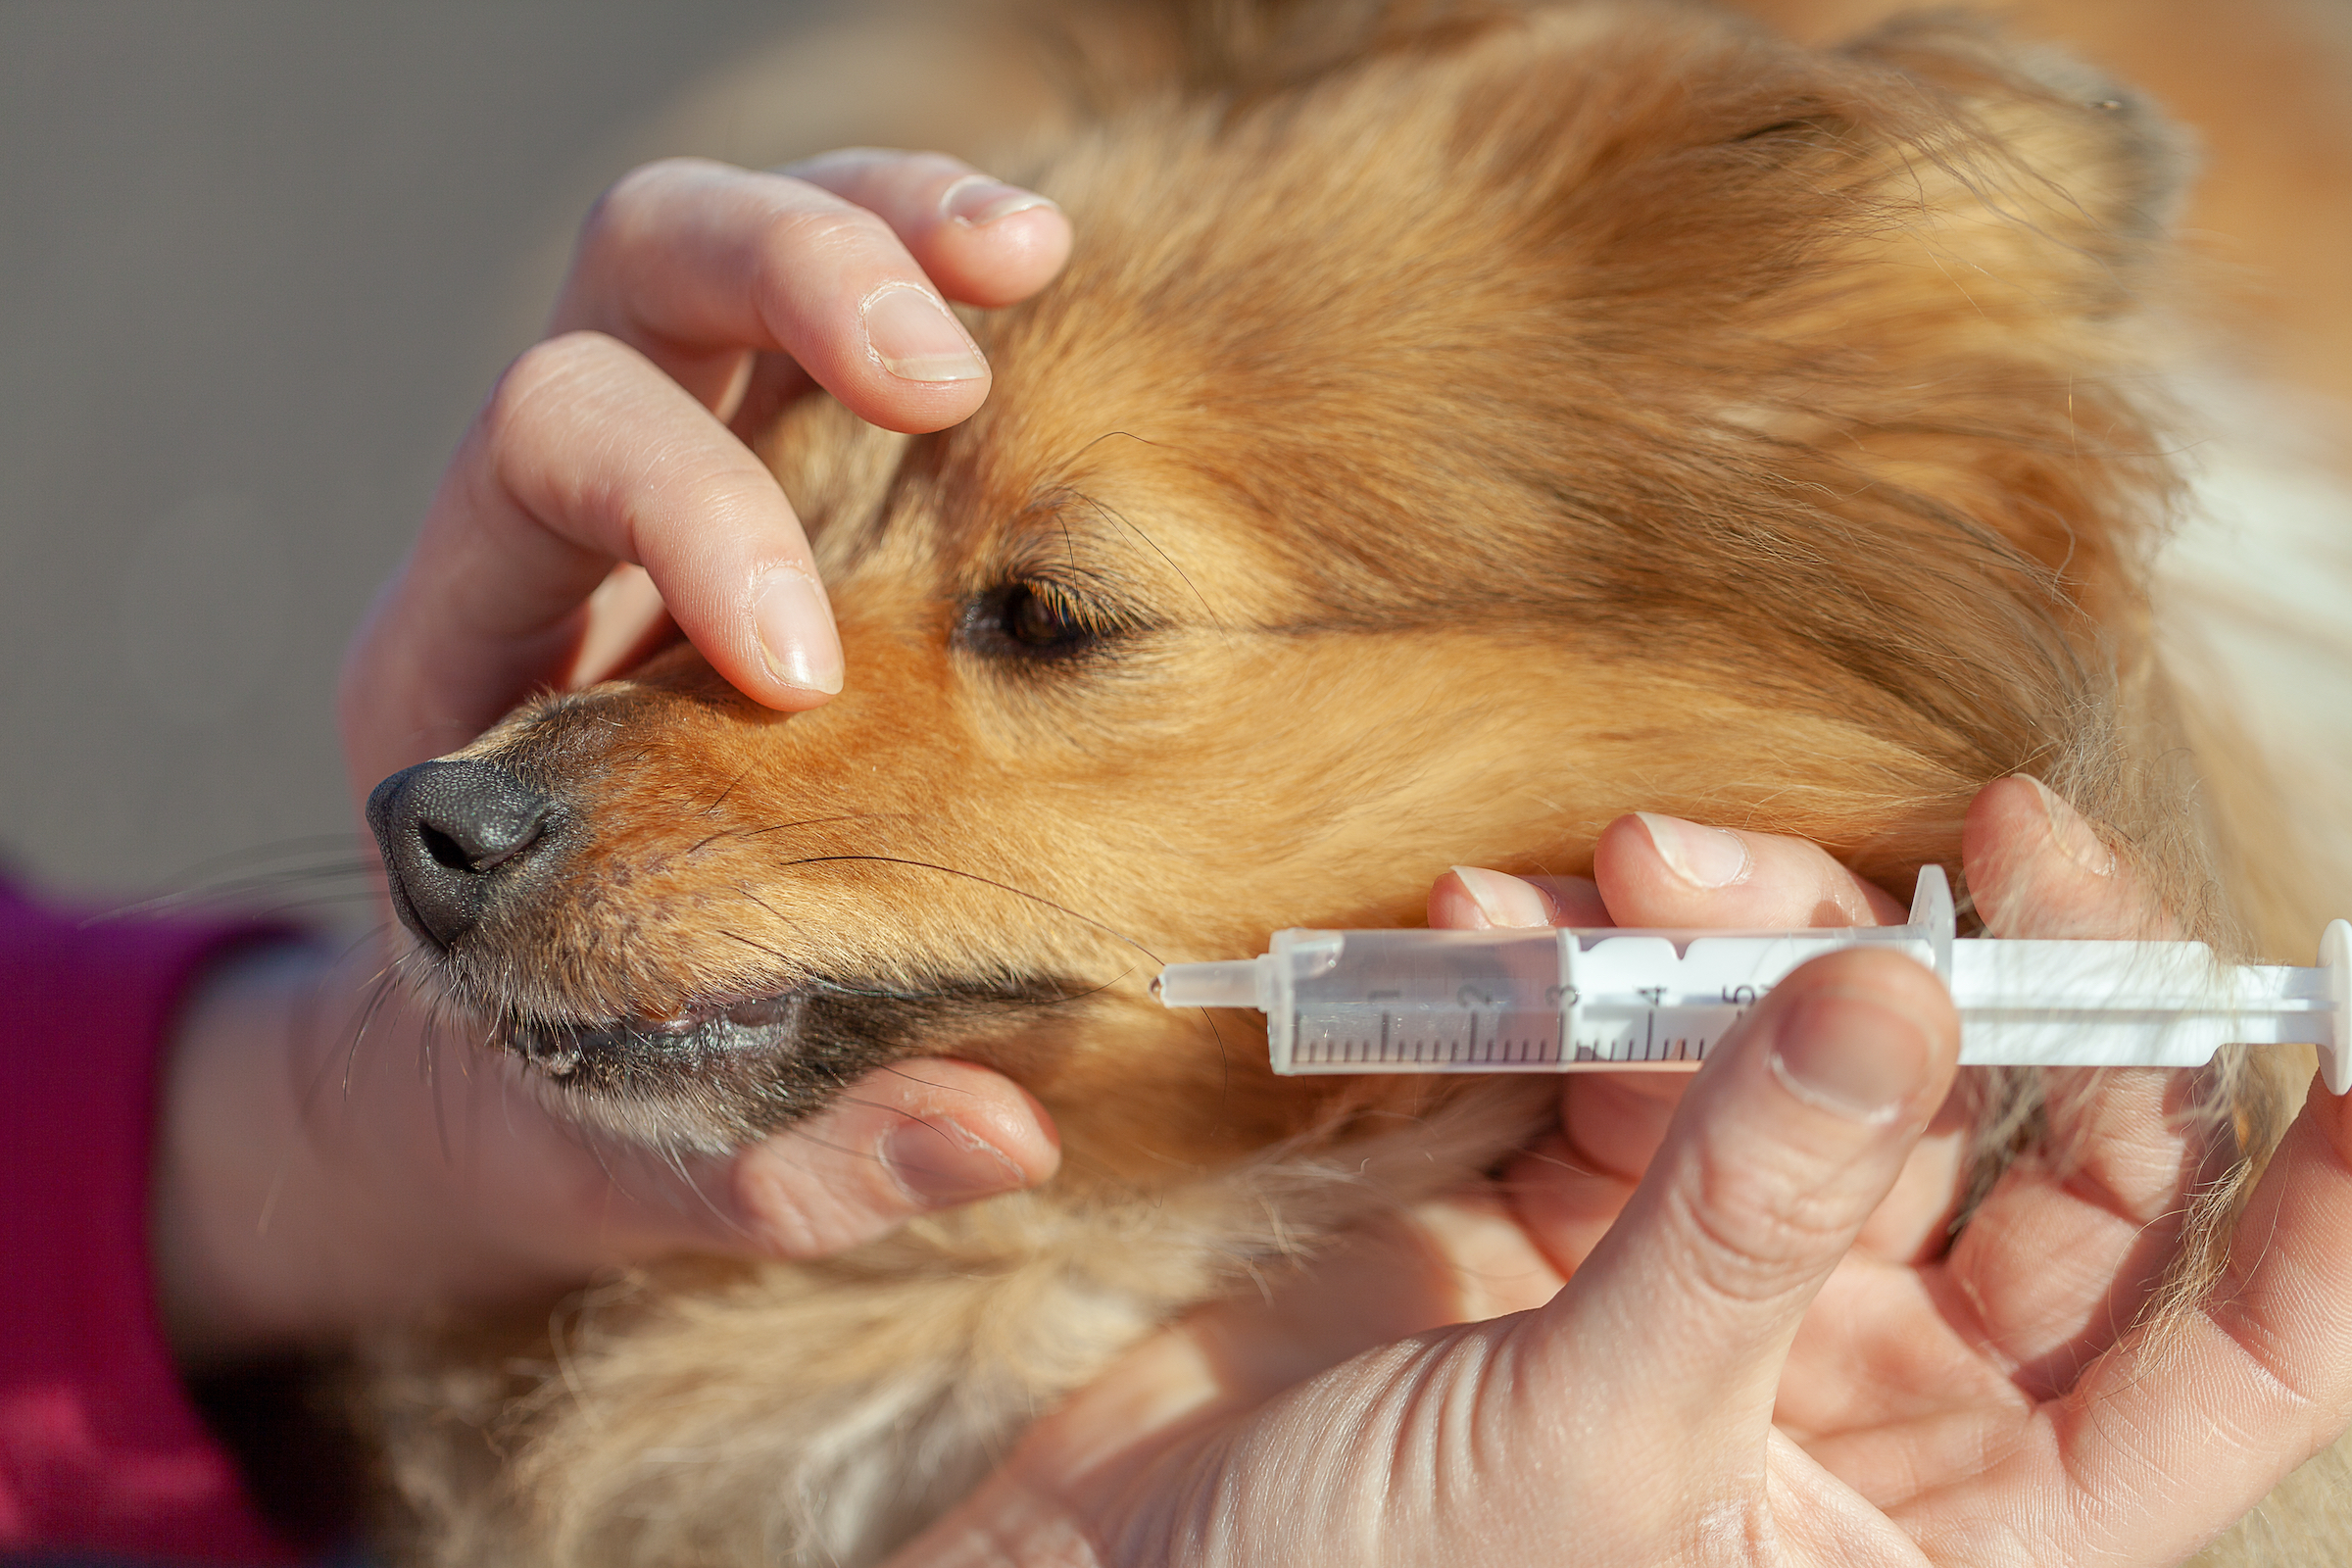 is peroxide safe for dogs to ingest